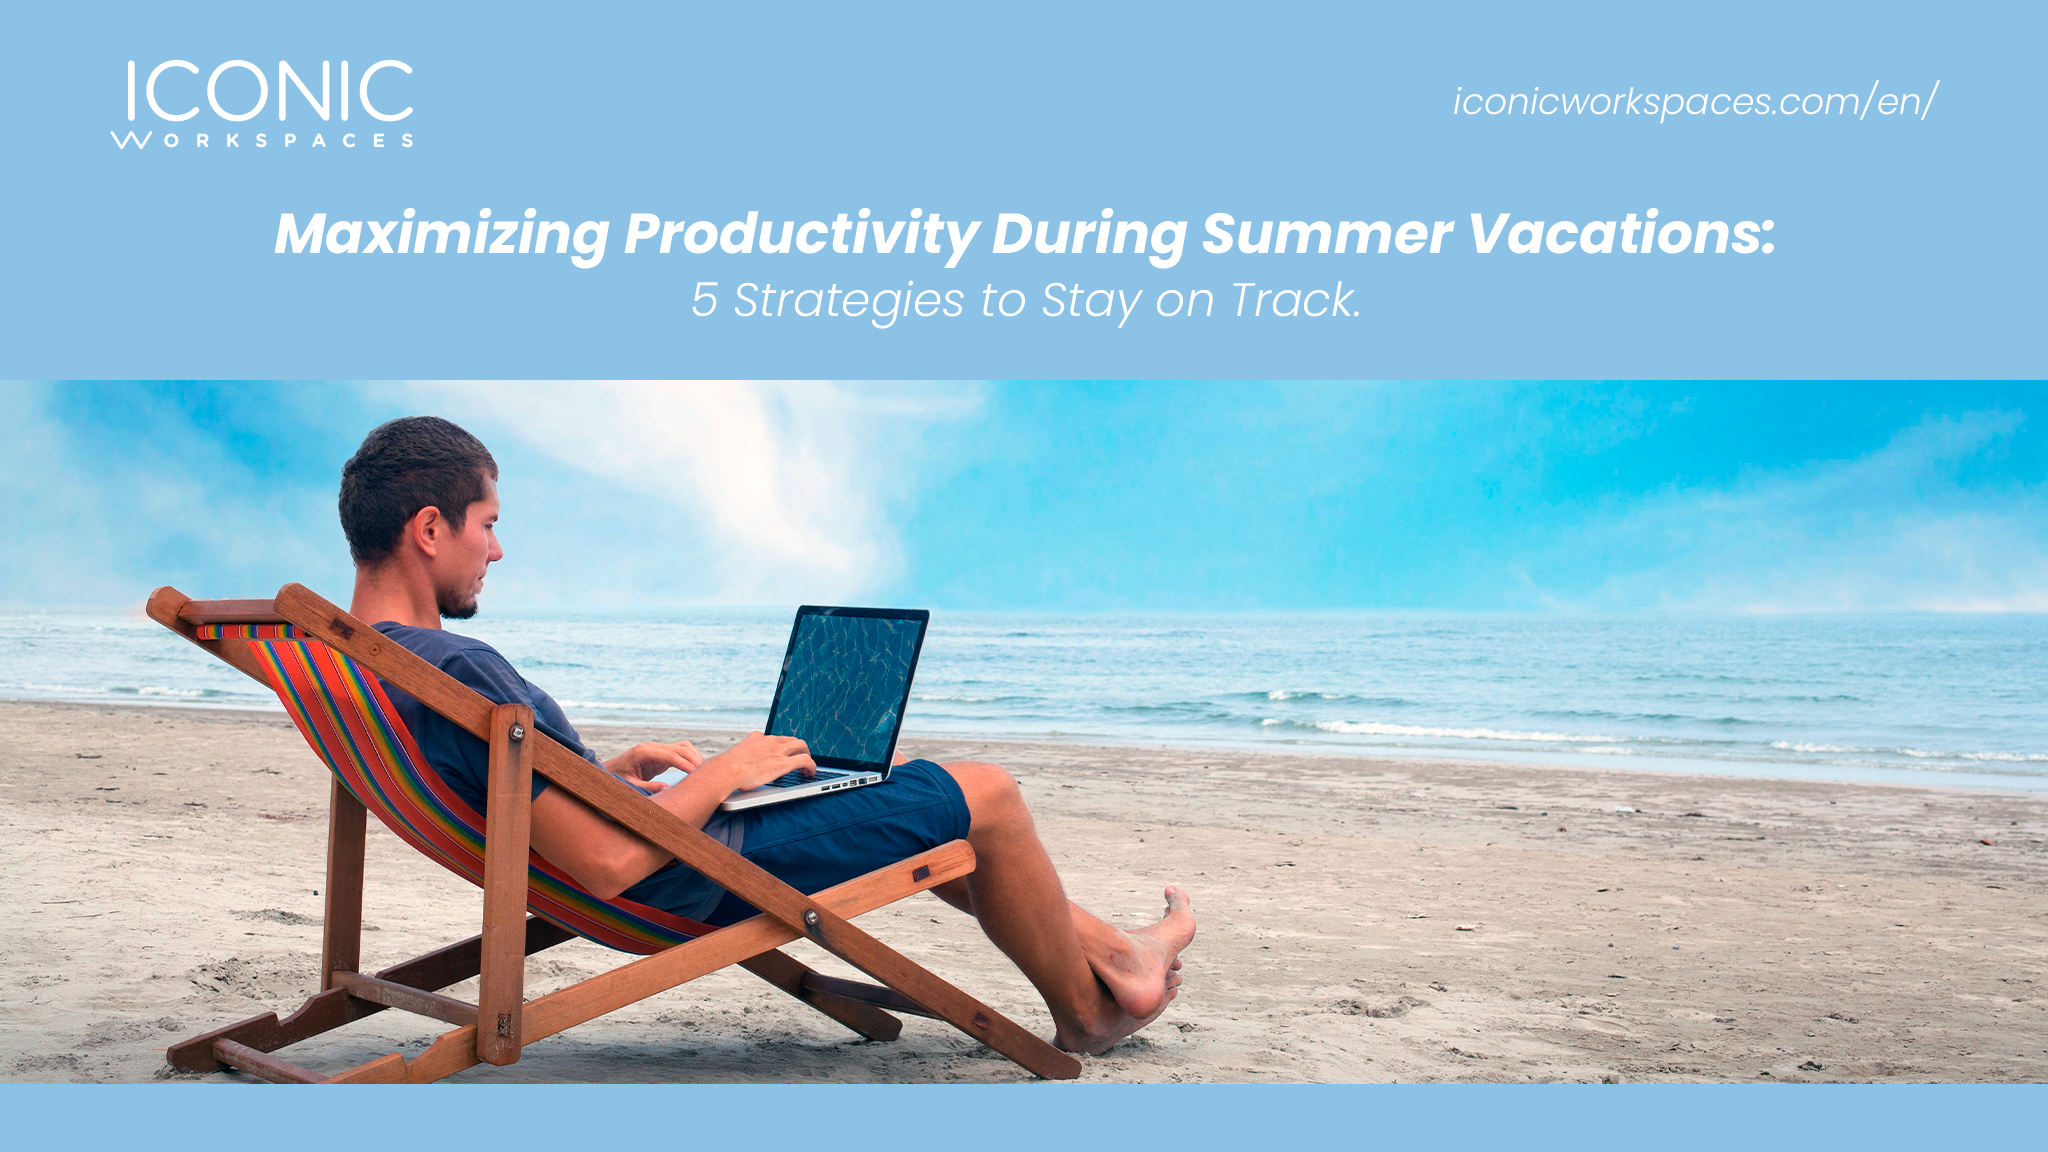 Maximizing Productivity During Summer Vacations: 5 Strategies to Stay on Track